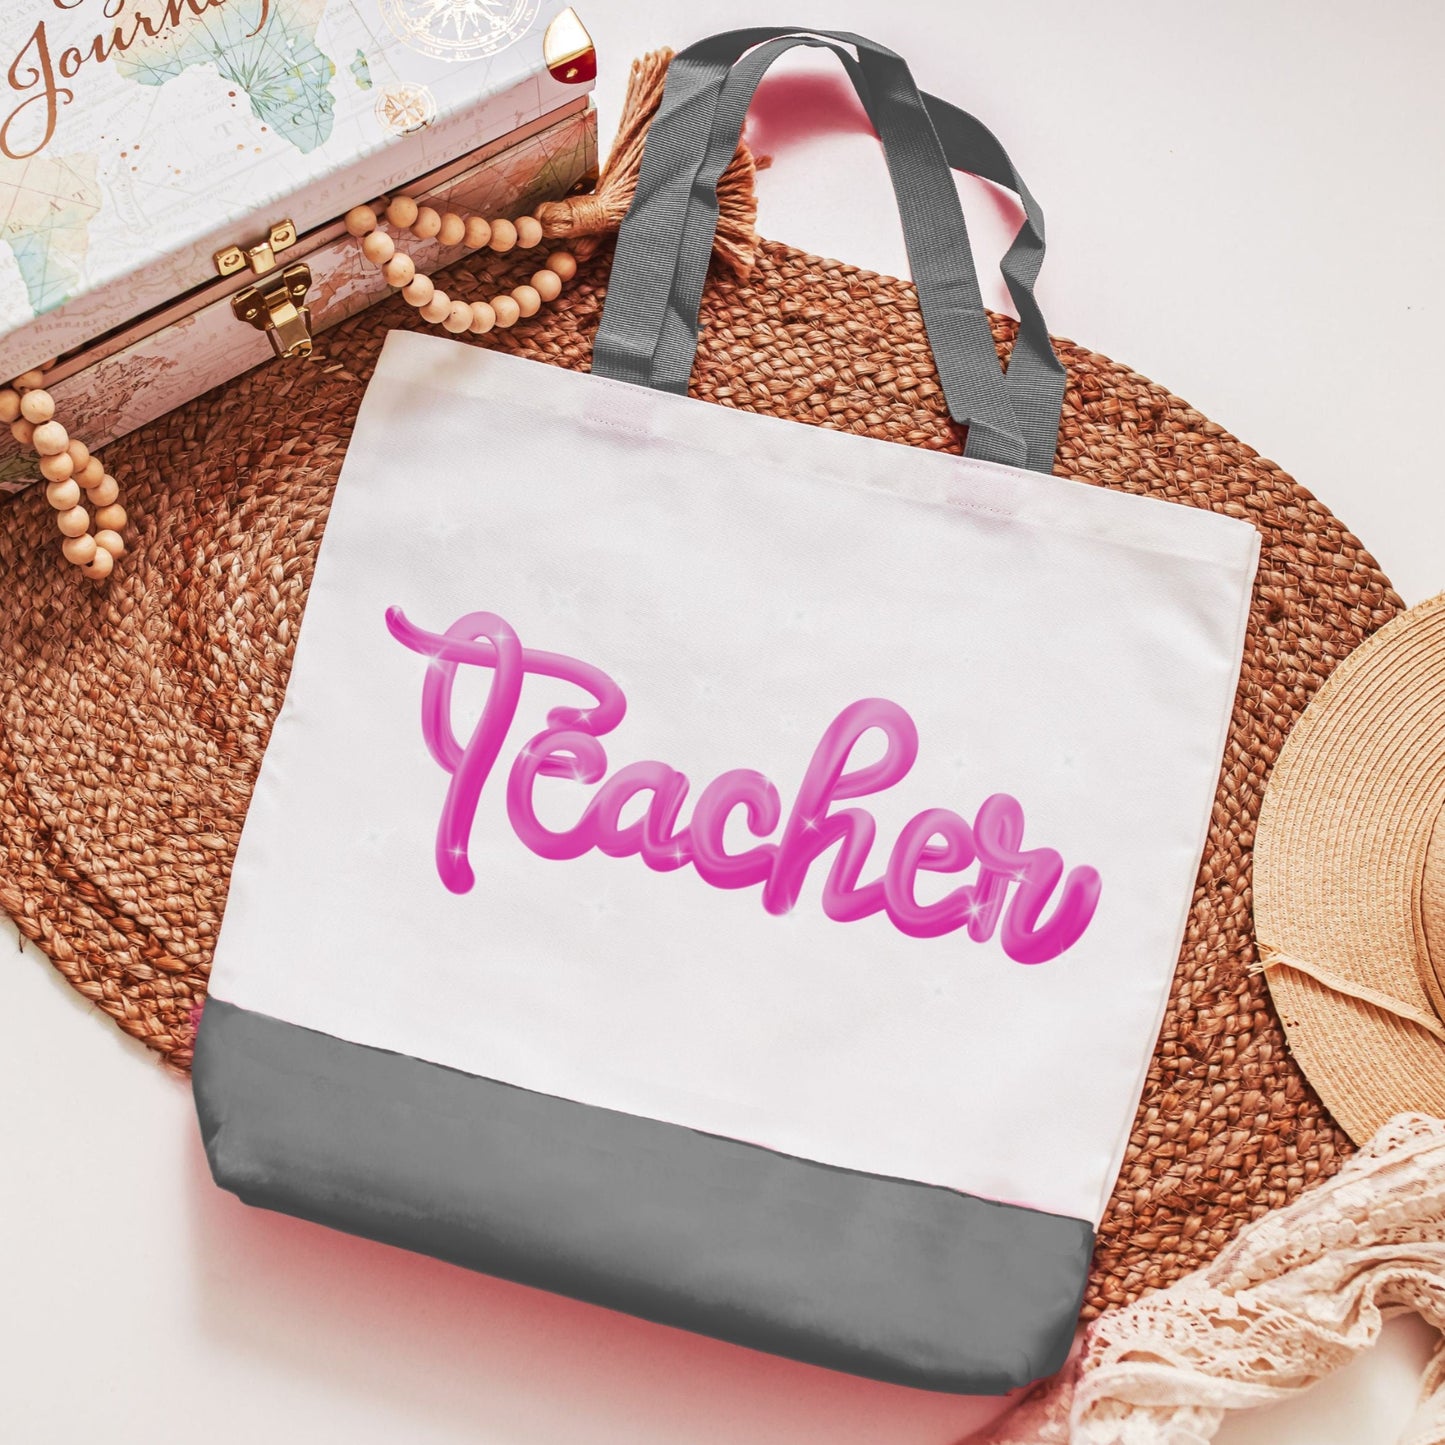 Pink teacher tote bag with handles 